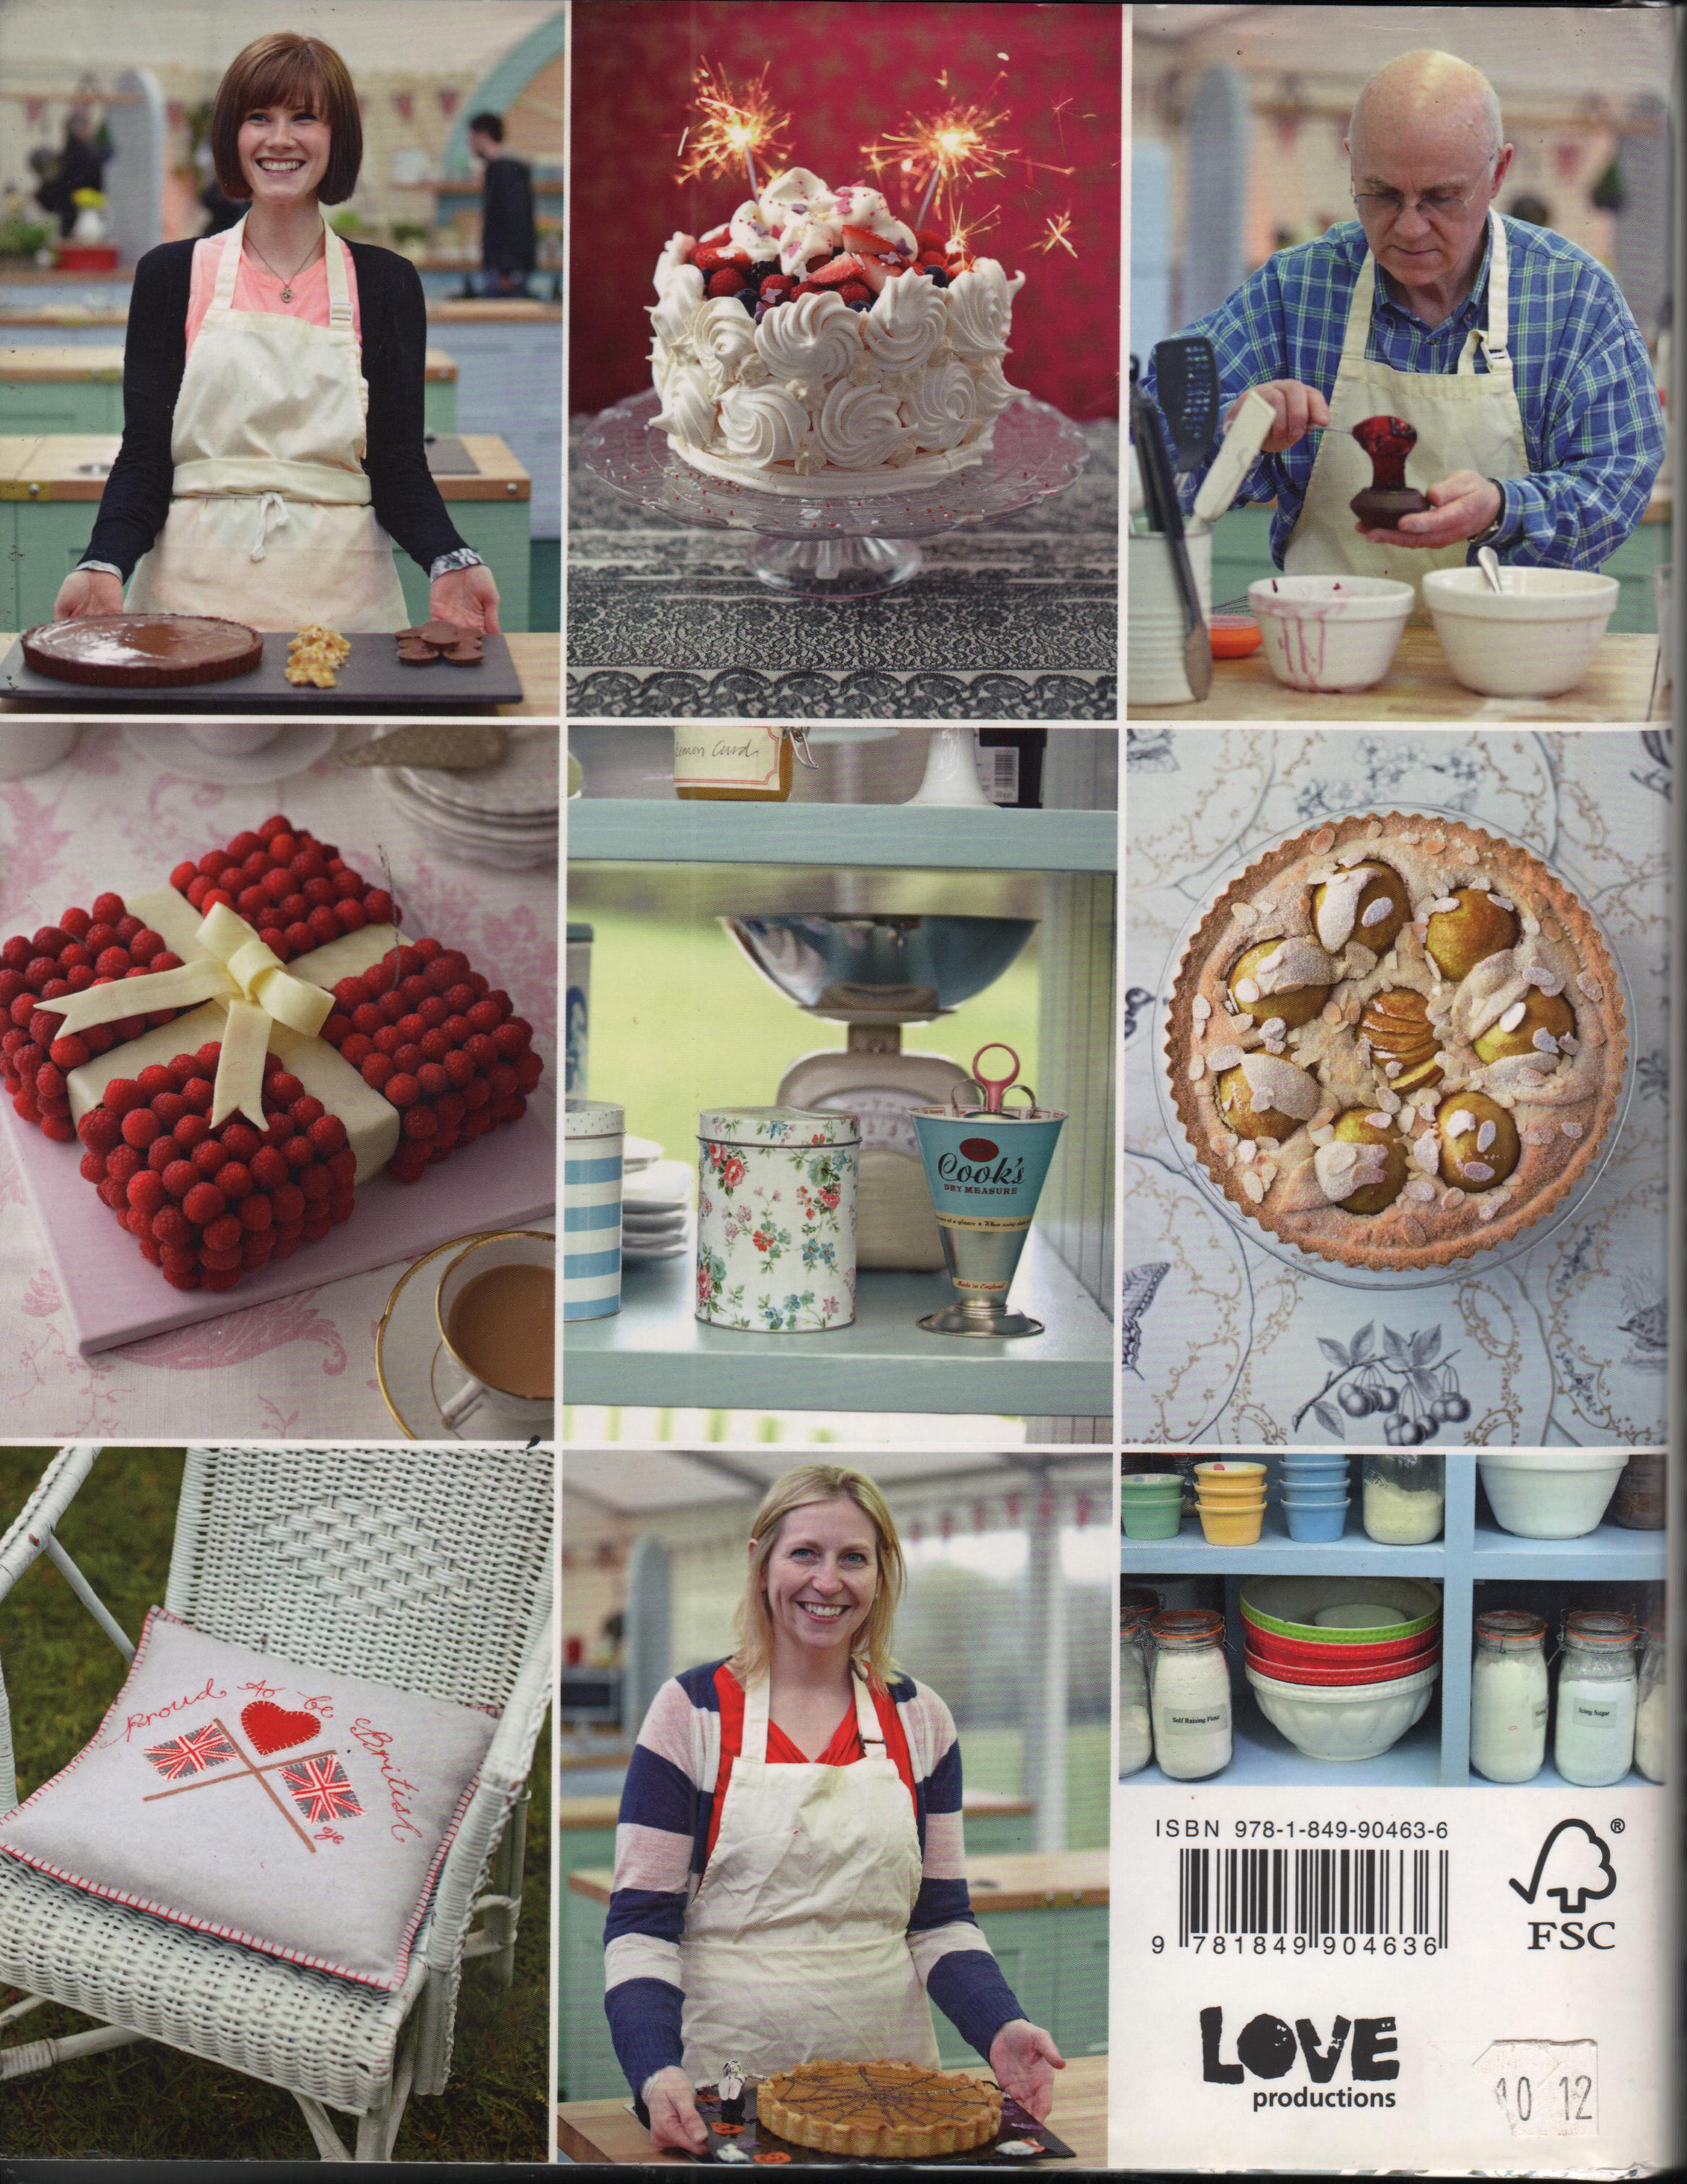 the-great-british-bake-off-back-cover.jpg